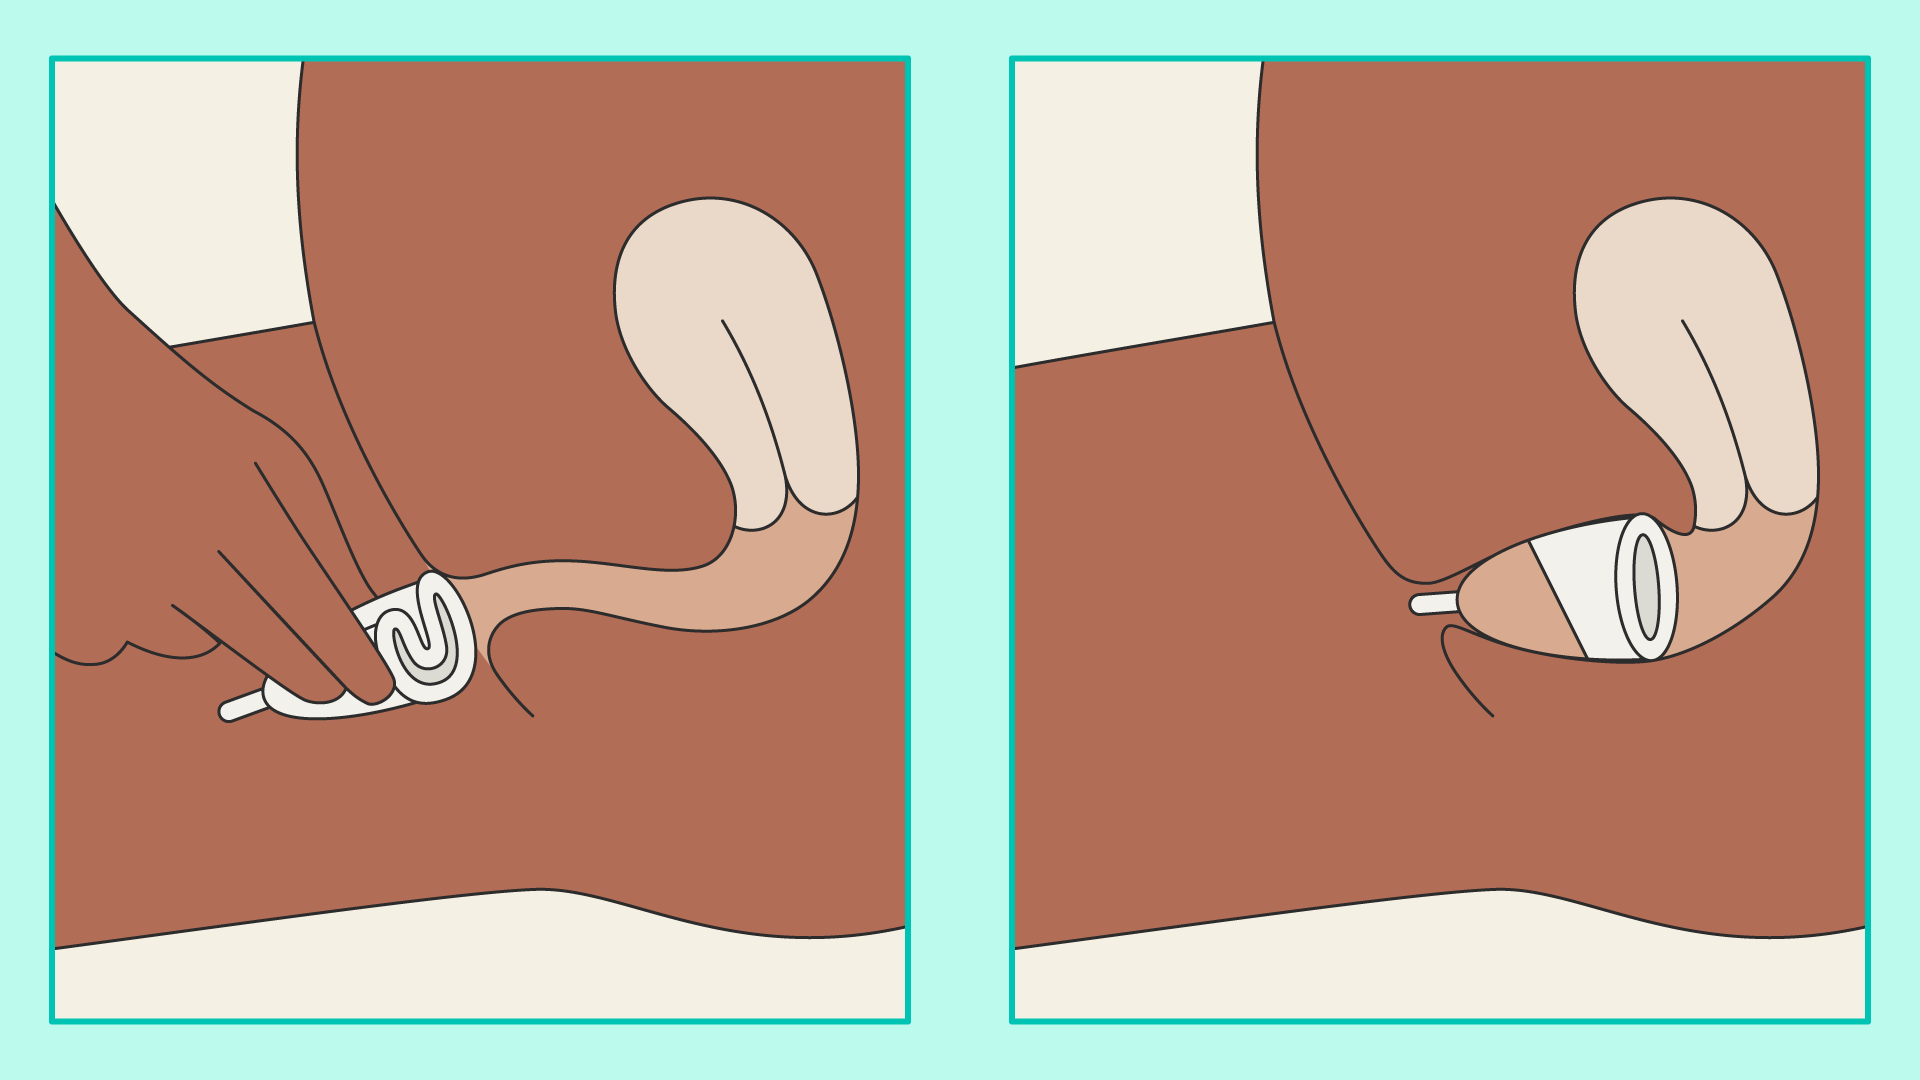 A diagram for how to use a menstrual cup